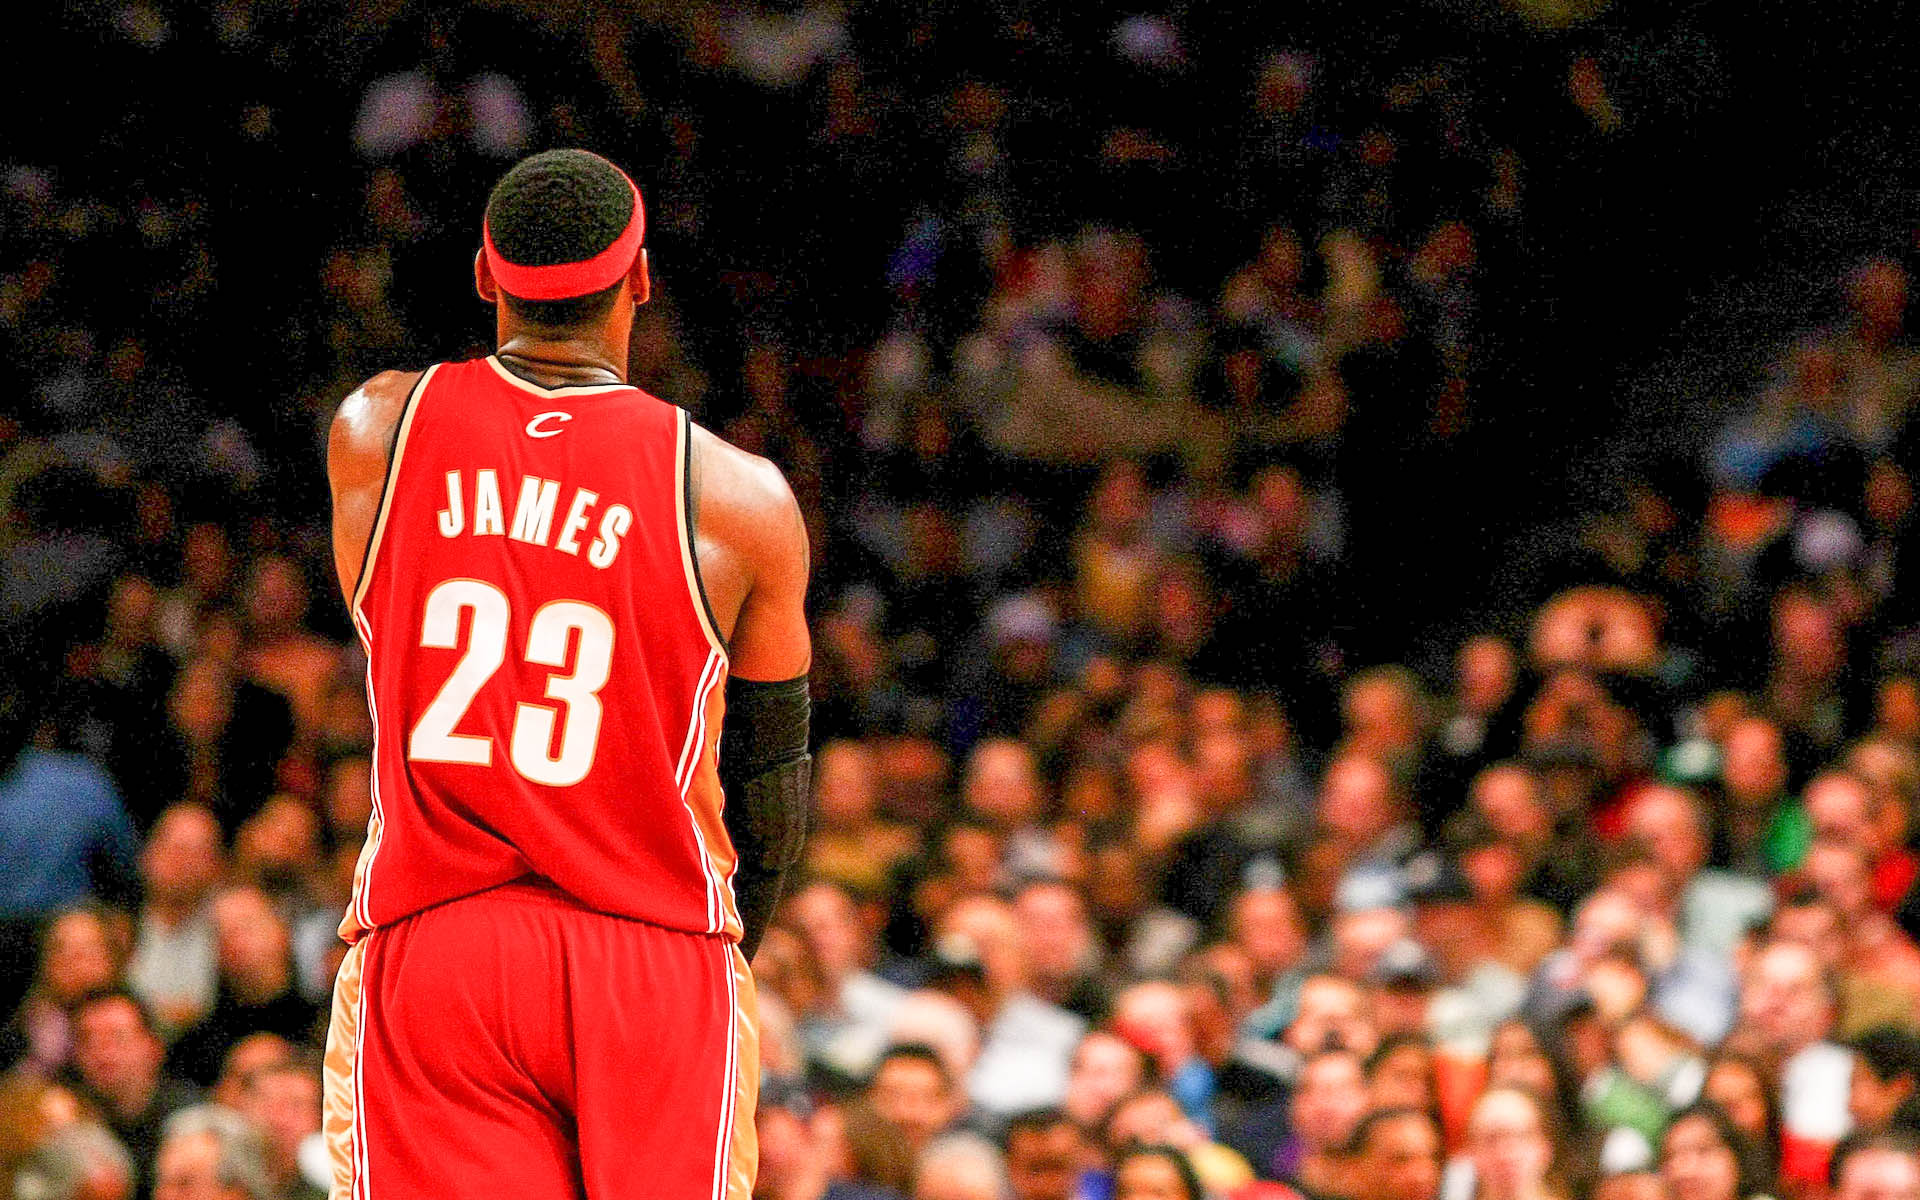 Cool Lebron Wallpapers